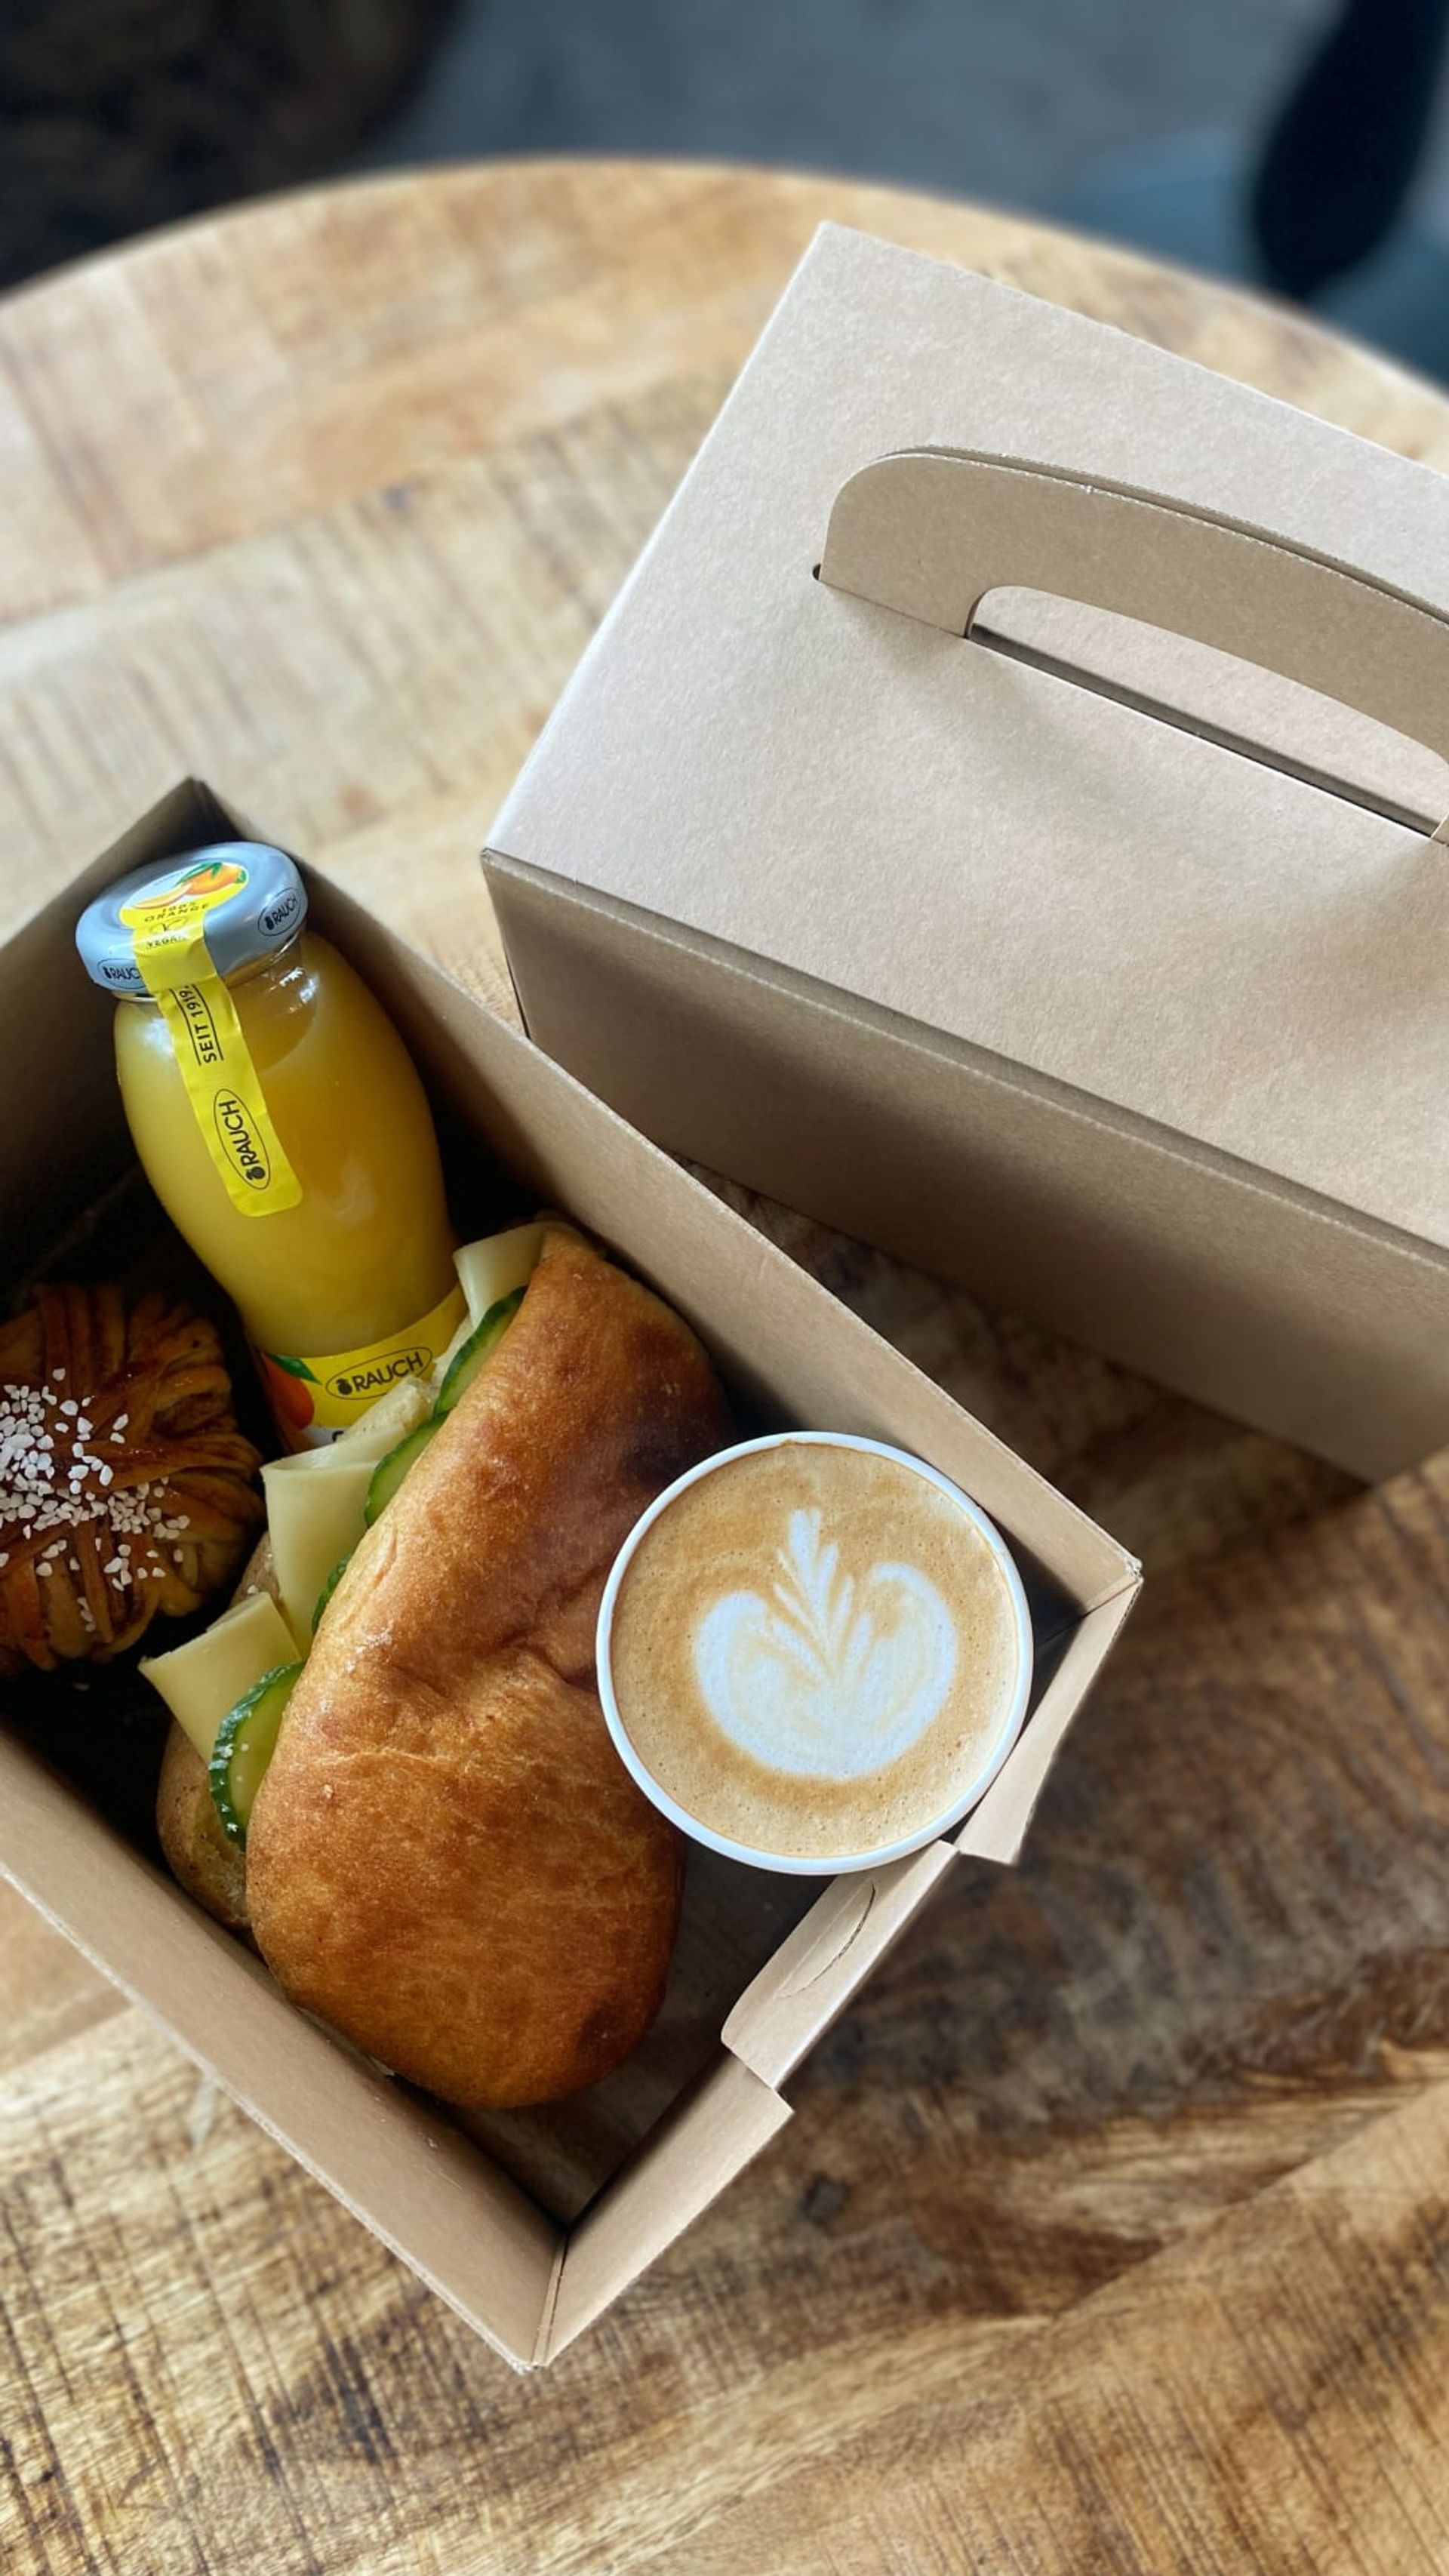 Meal box from The Bakery